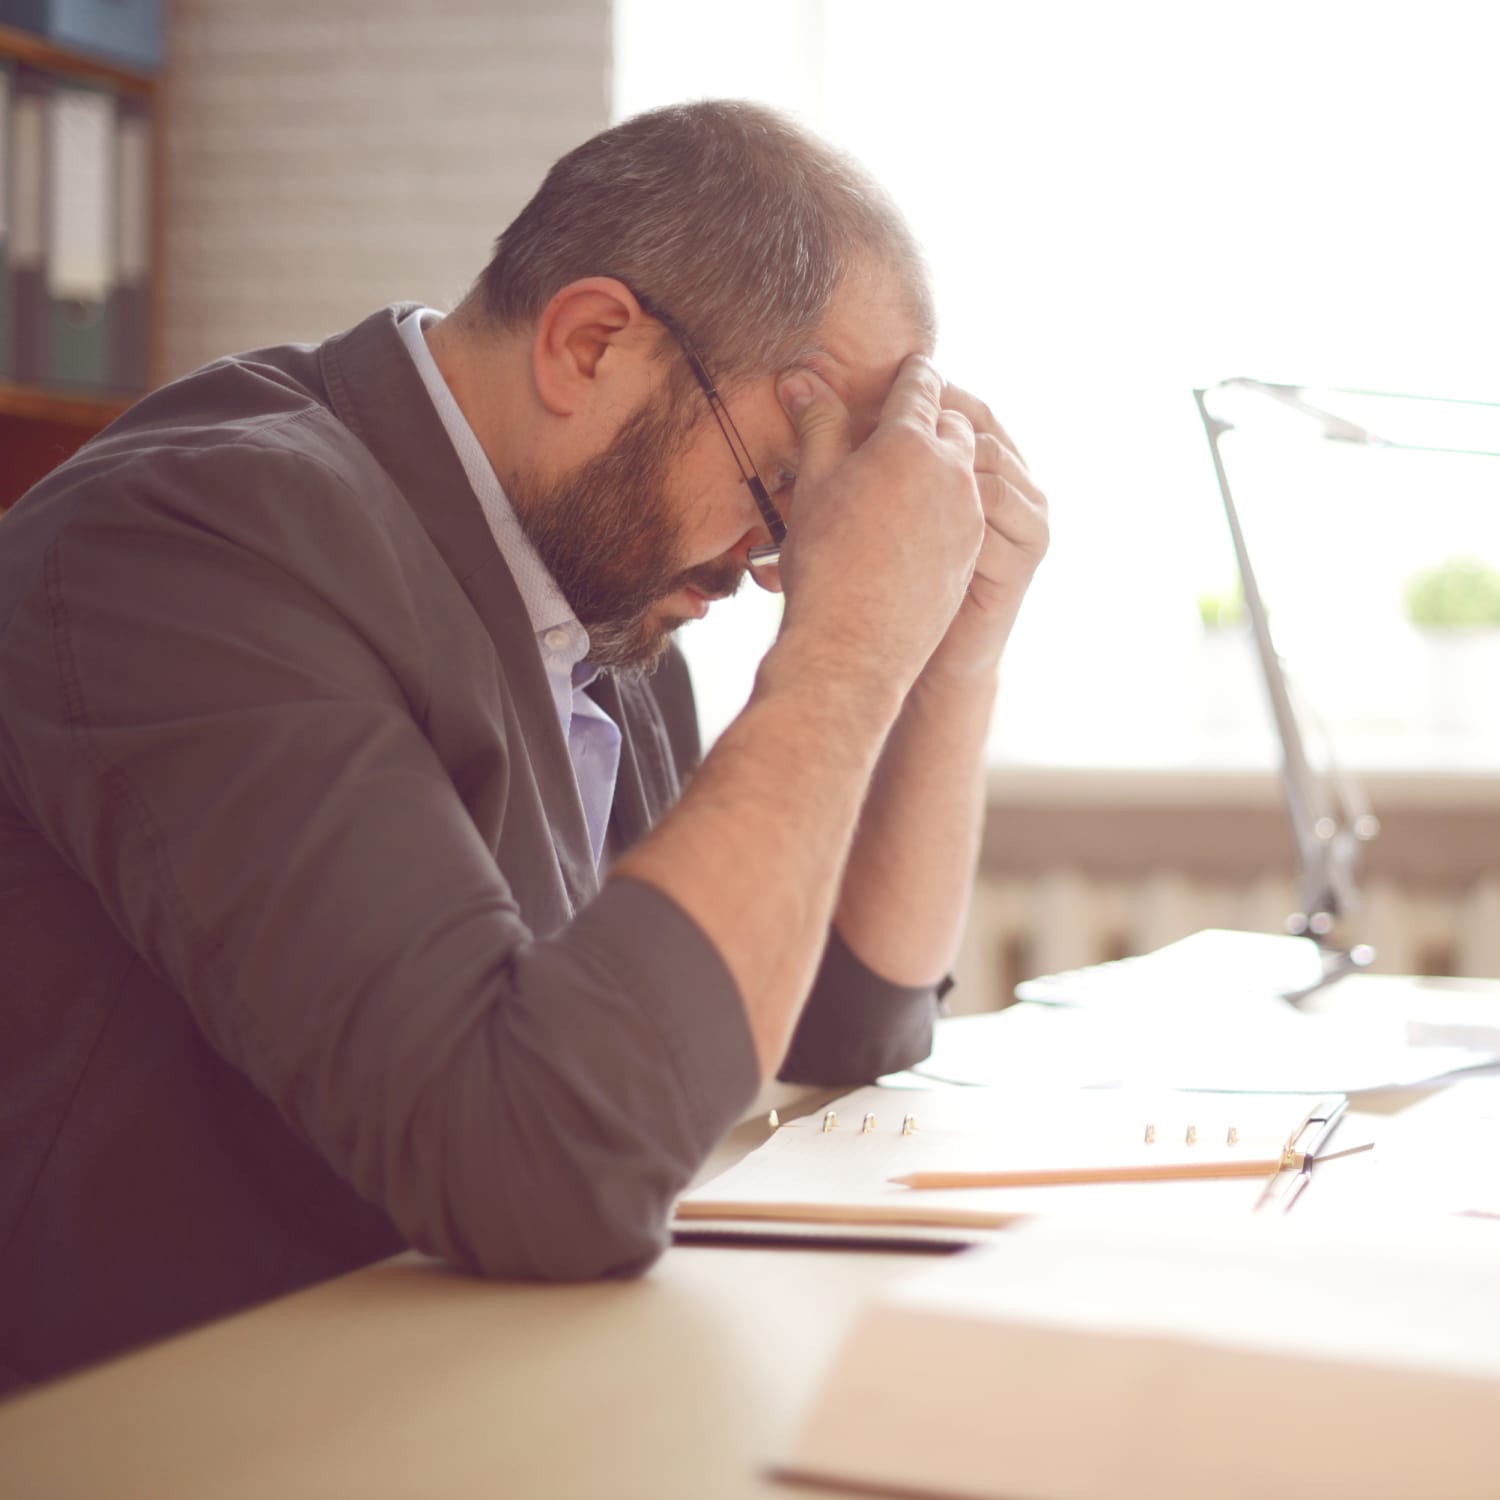 What is chronic stress? Hint: It's not the same as regular stress